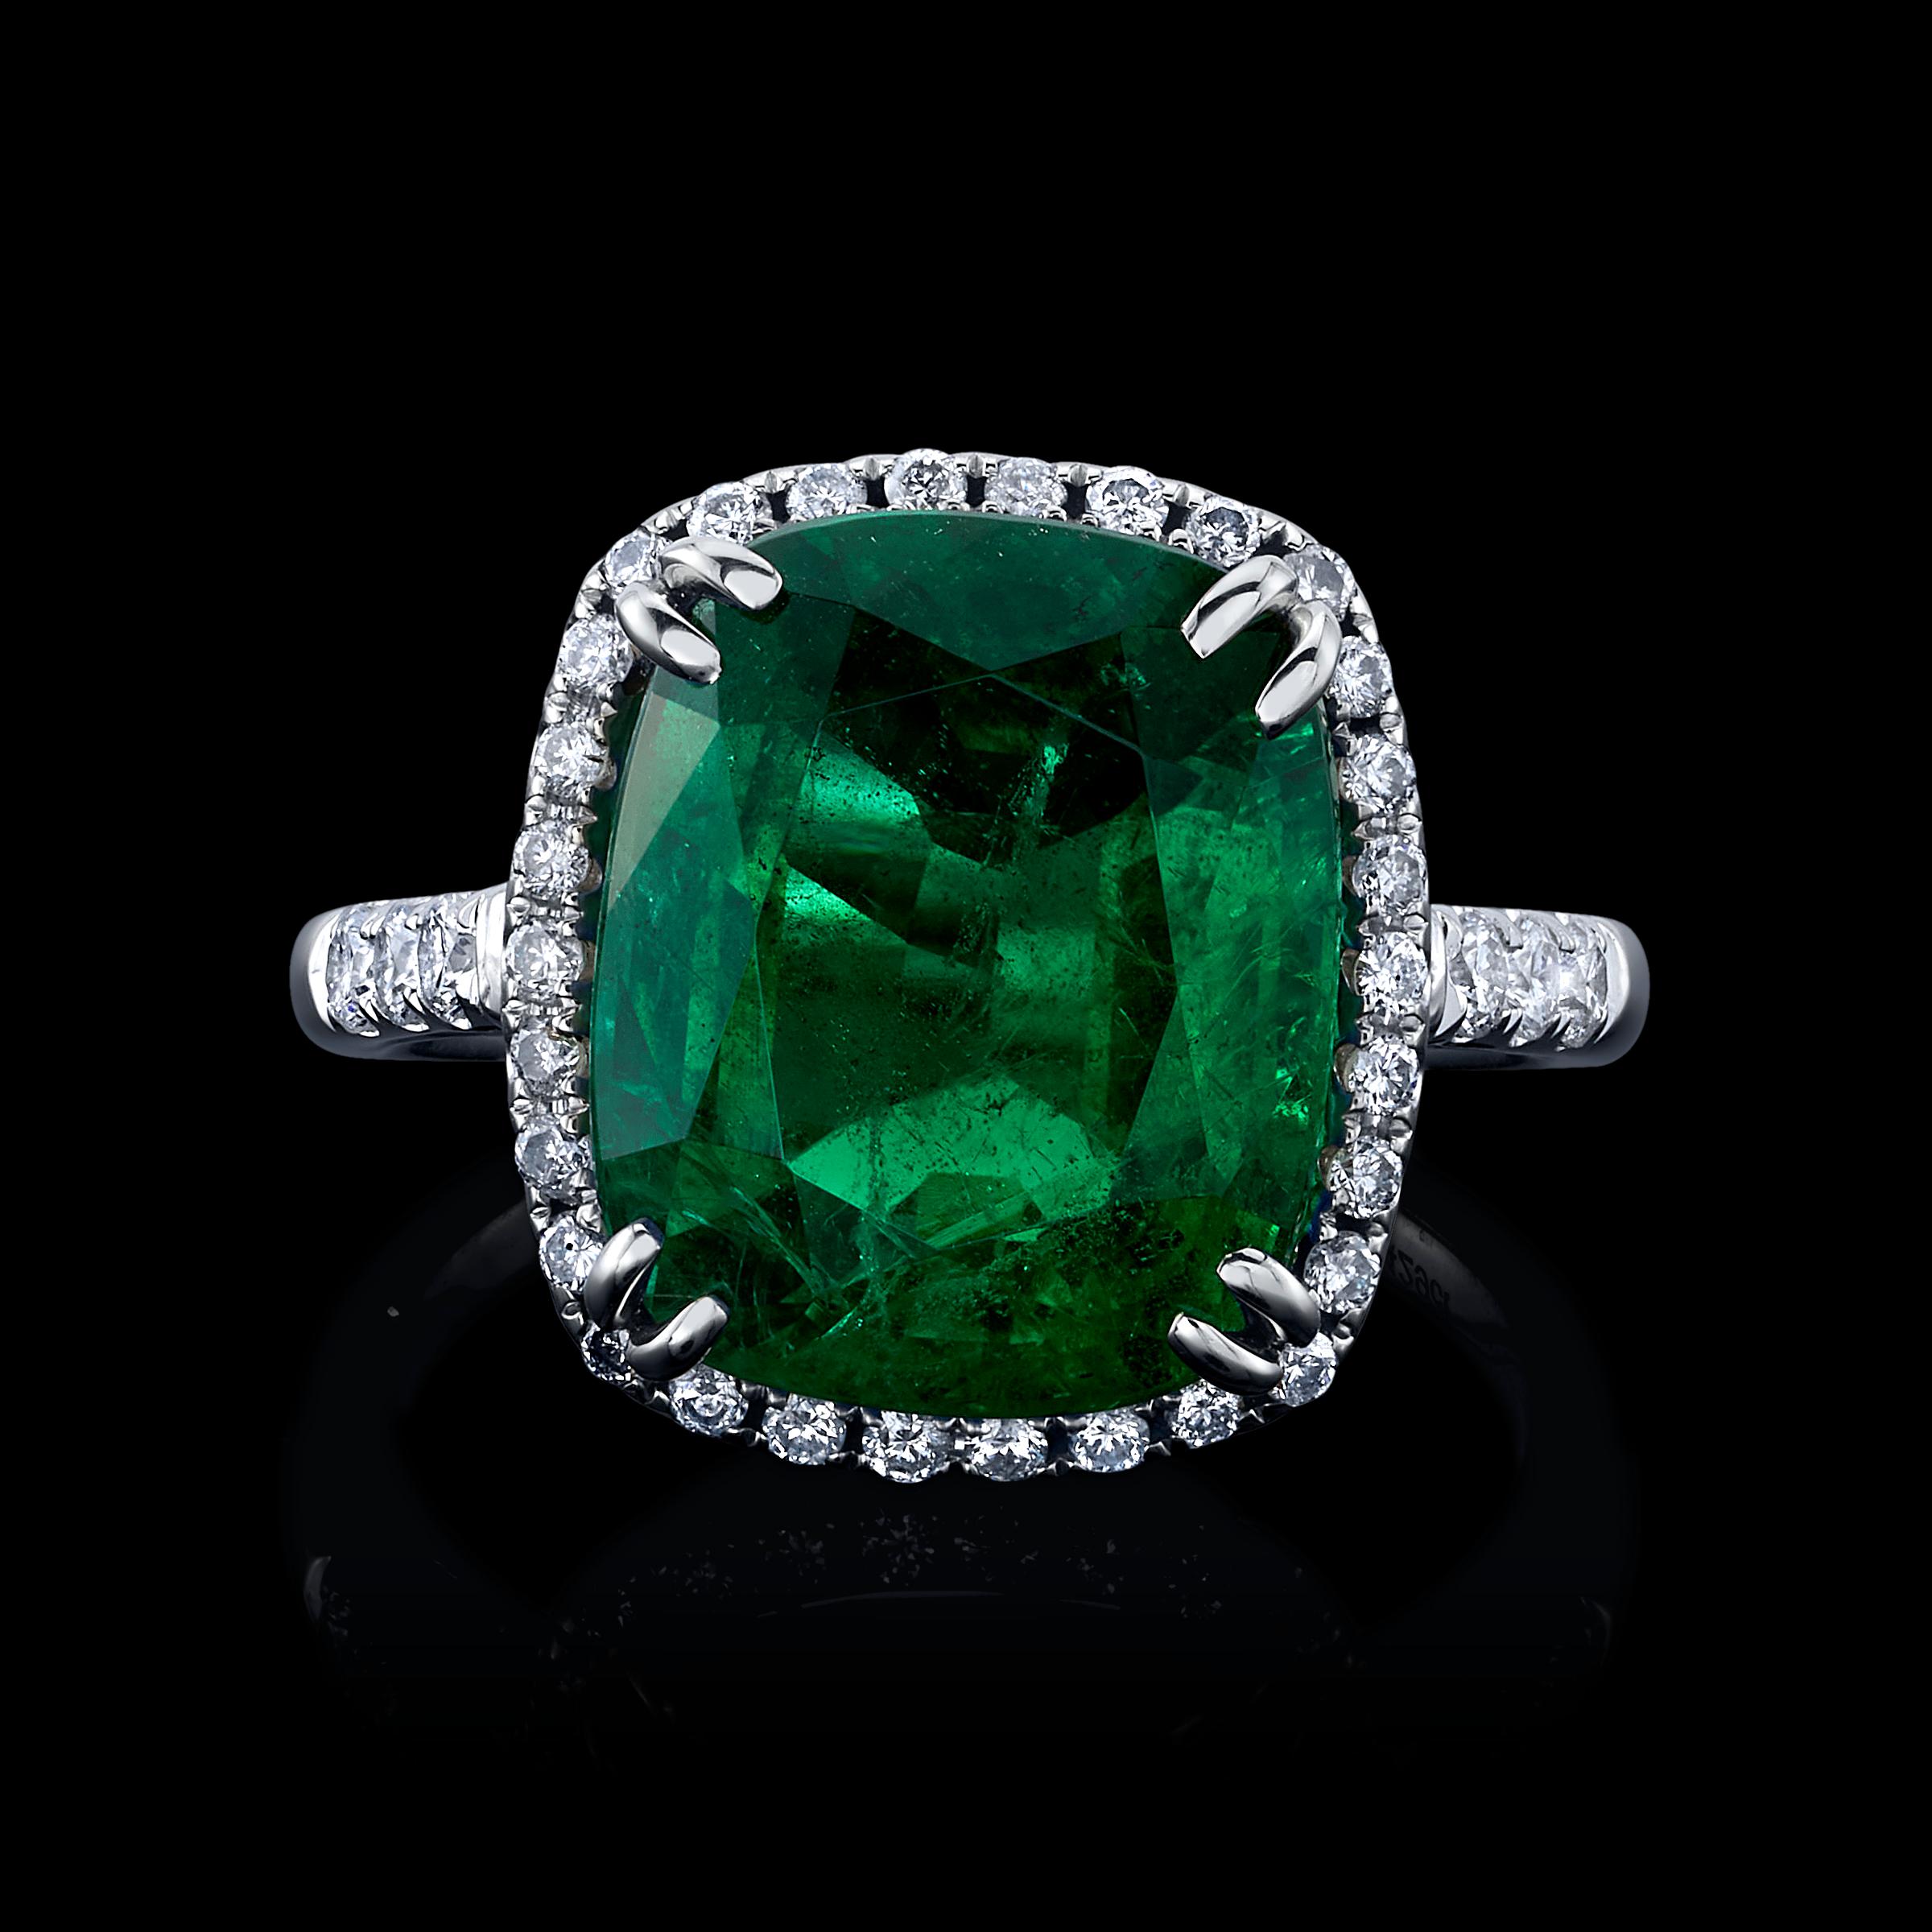 8.01ct Cushion Green Emerald, set in platinum with 0.42cttw colorless melee